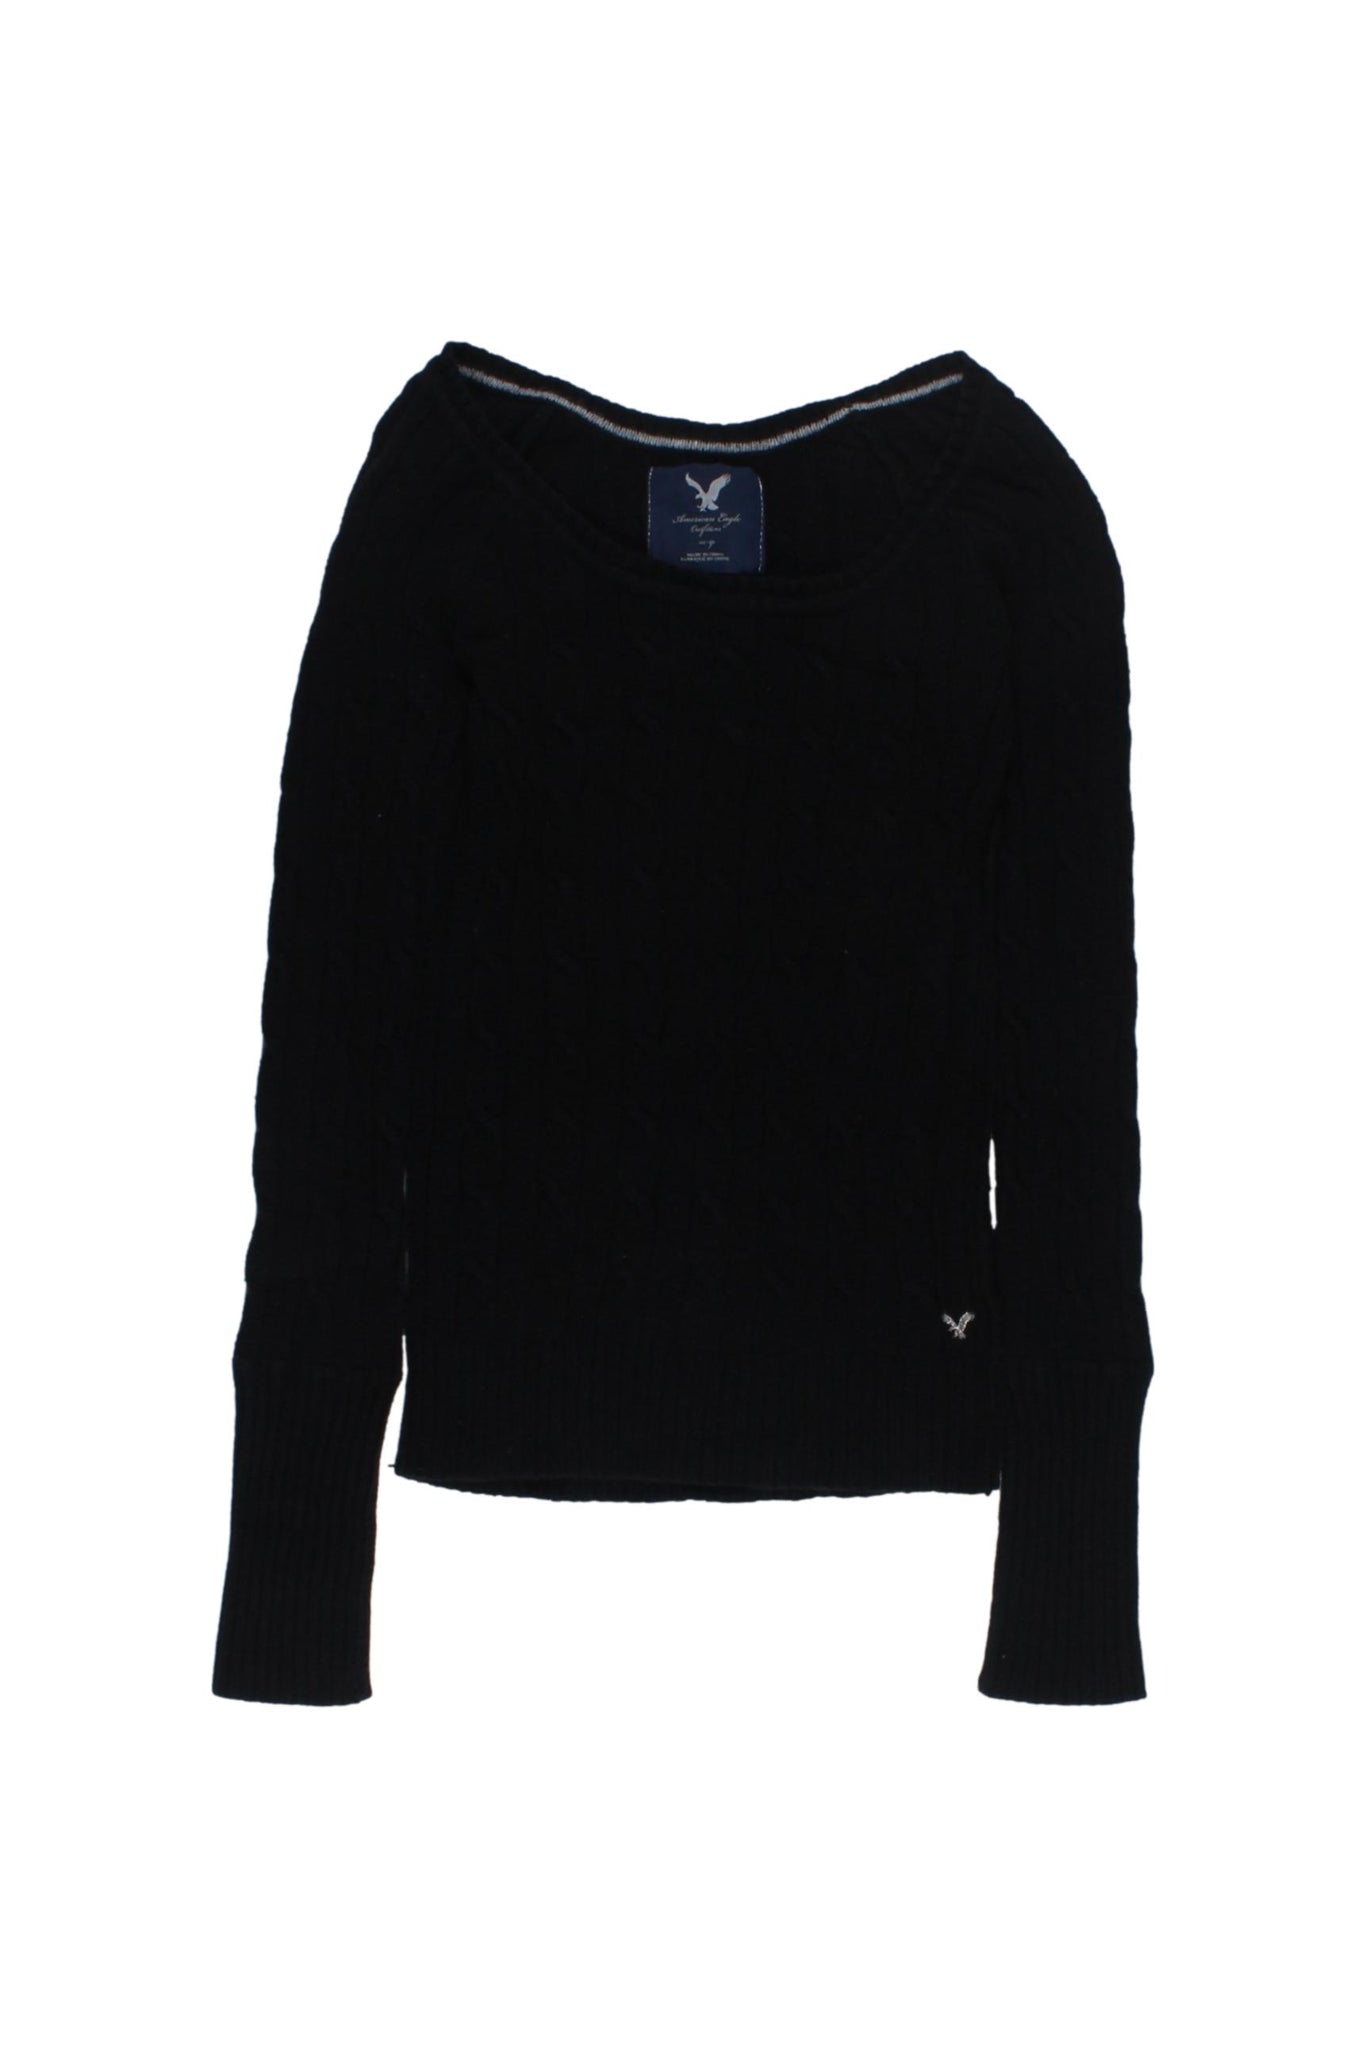 AMERICAN EAGLE OUTFITTERS - Sueter Color Negro